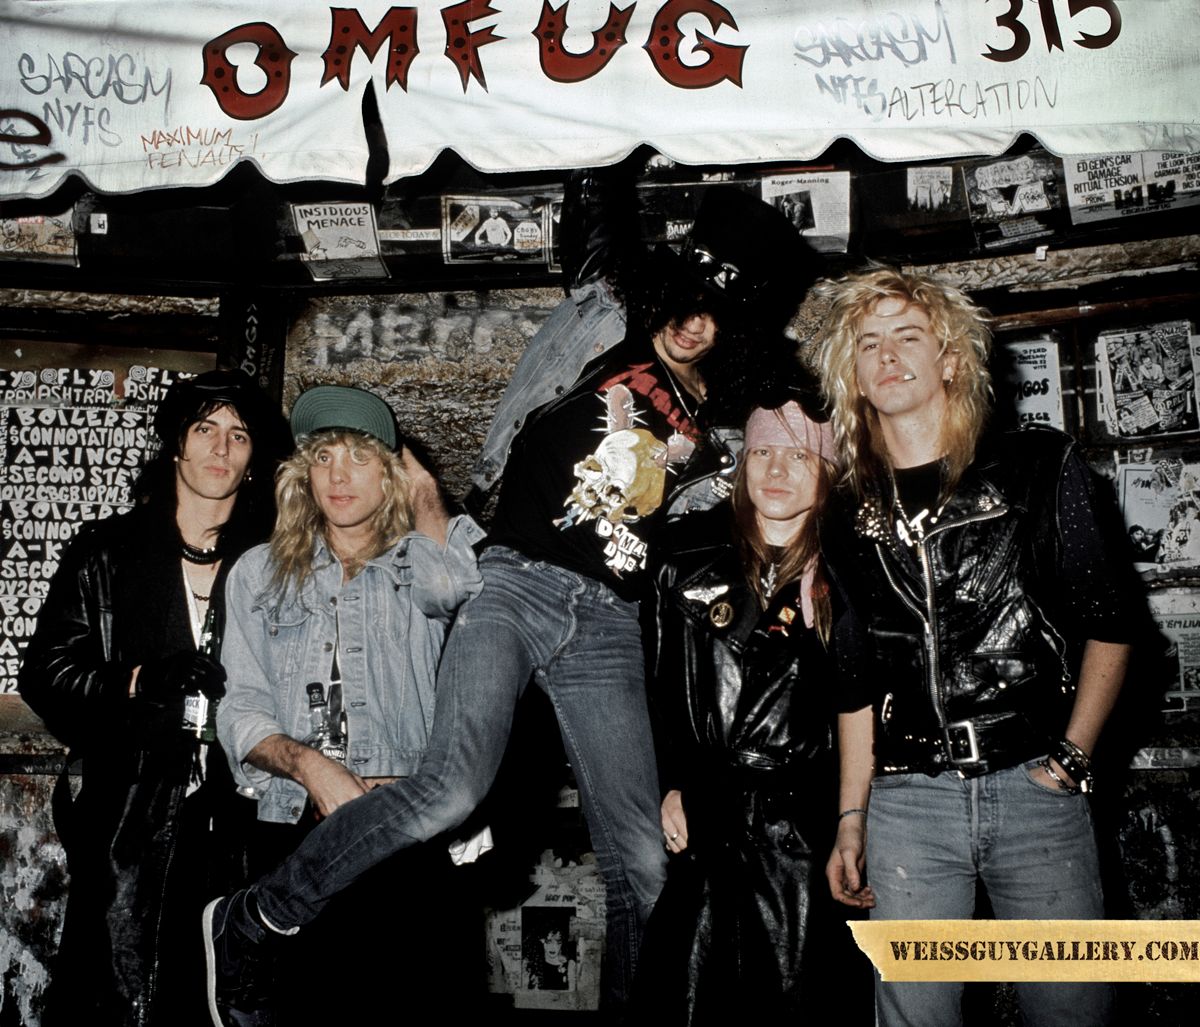 Guns N Roses: GNR hit the scene in 87 and immediately they had an edge that a lot of the 80s bands didnt have. They had a dangerous punky attitude that was more akin to Johnny Thunders Heartbreakers than Jon Bon Jovi. I love Slashs guitar work especially in the arena of 80s shred guitar as his whole thing was about feel and groove. This translated to the GNR songs which made them really unique in that environment. I still bump into the guys occasionally and we have a great rapport.